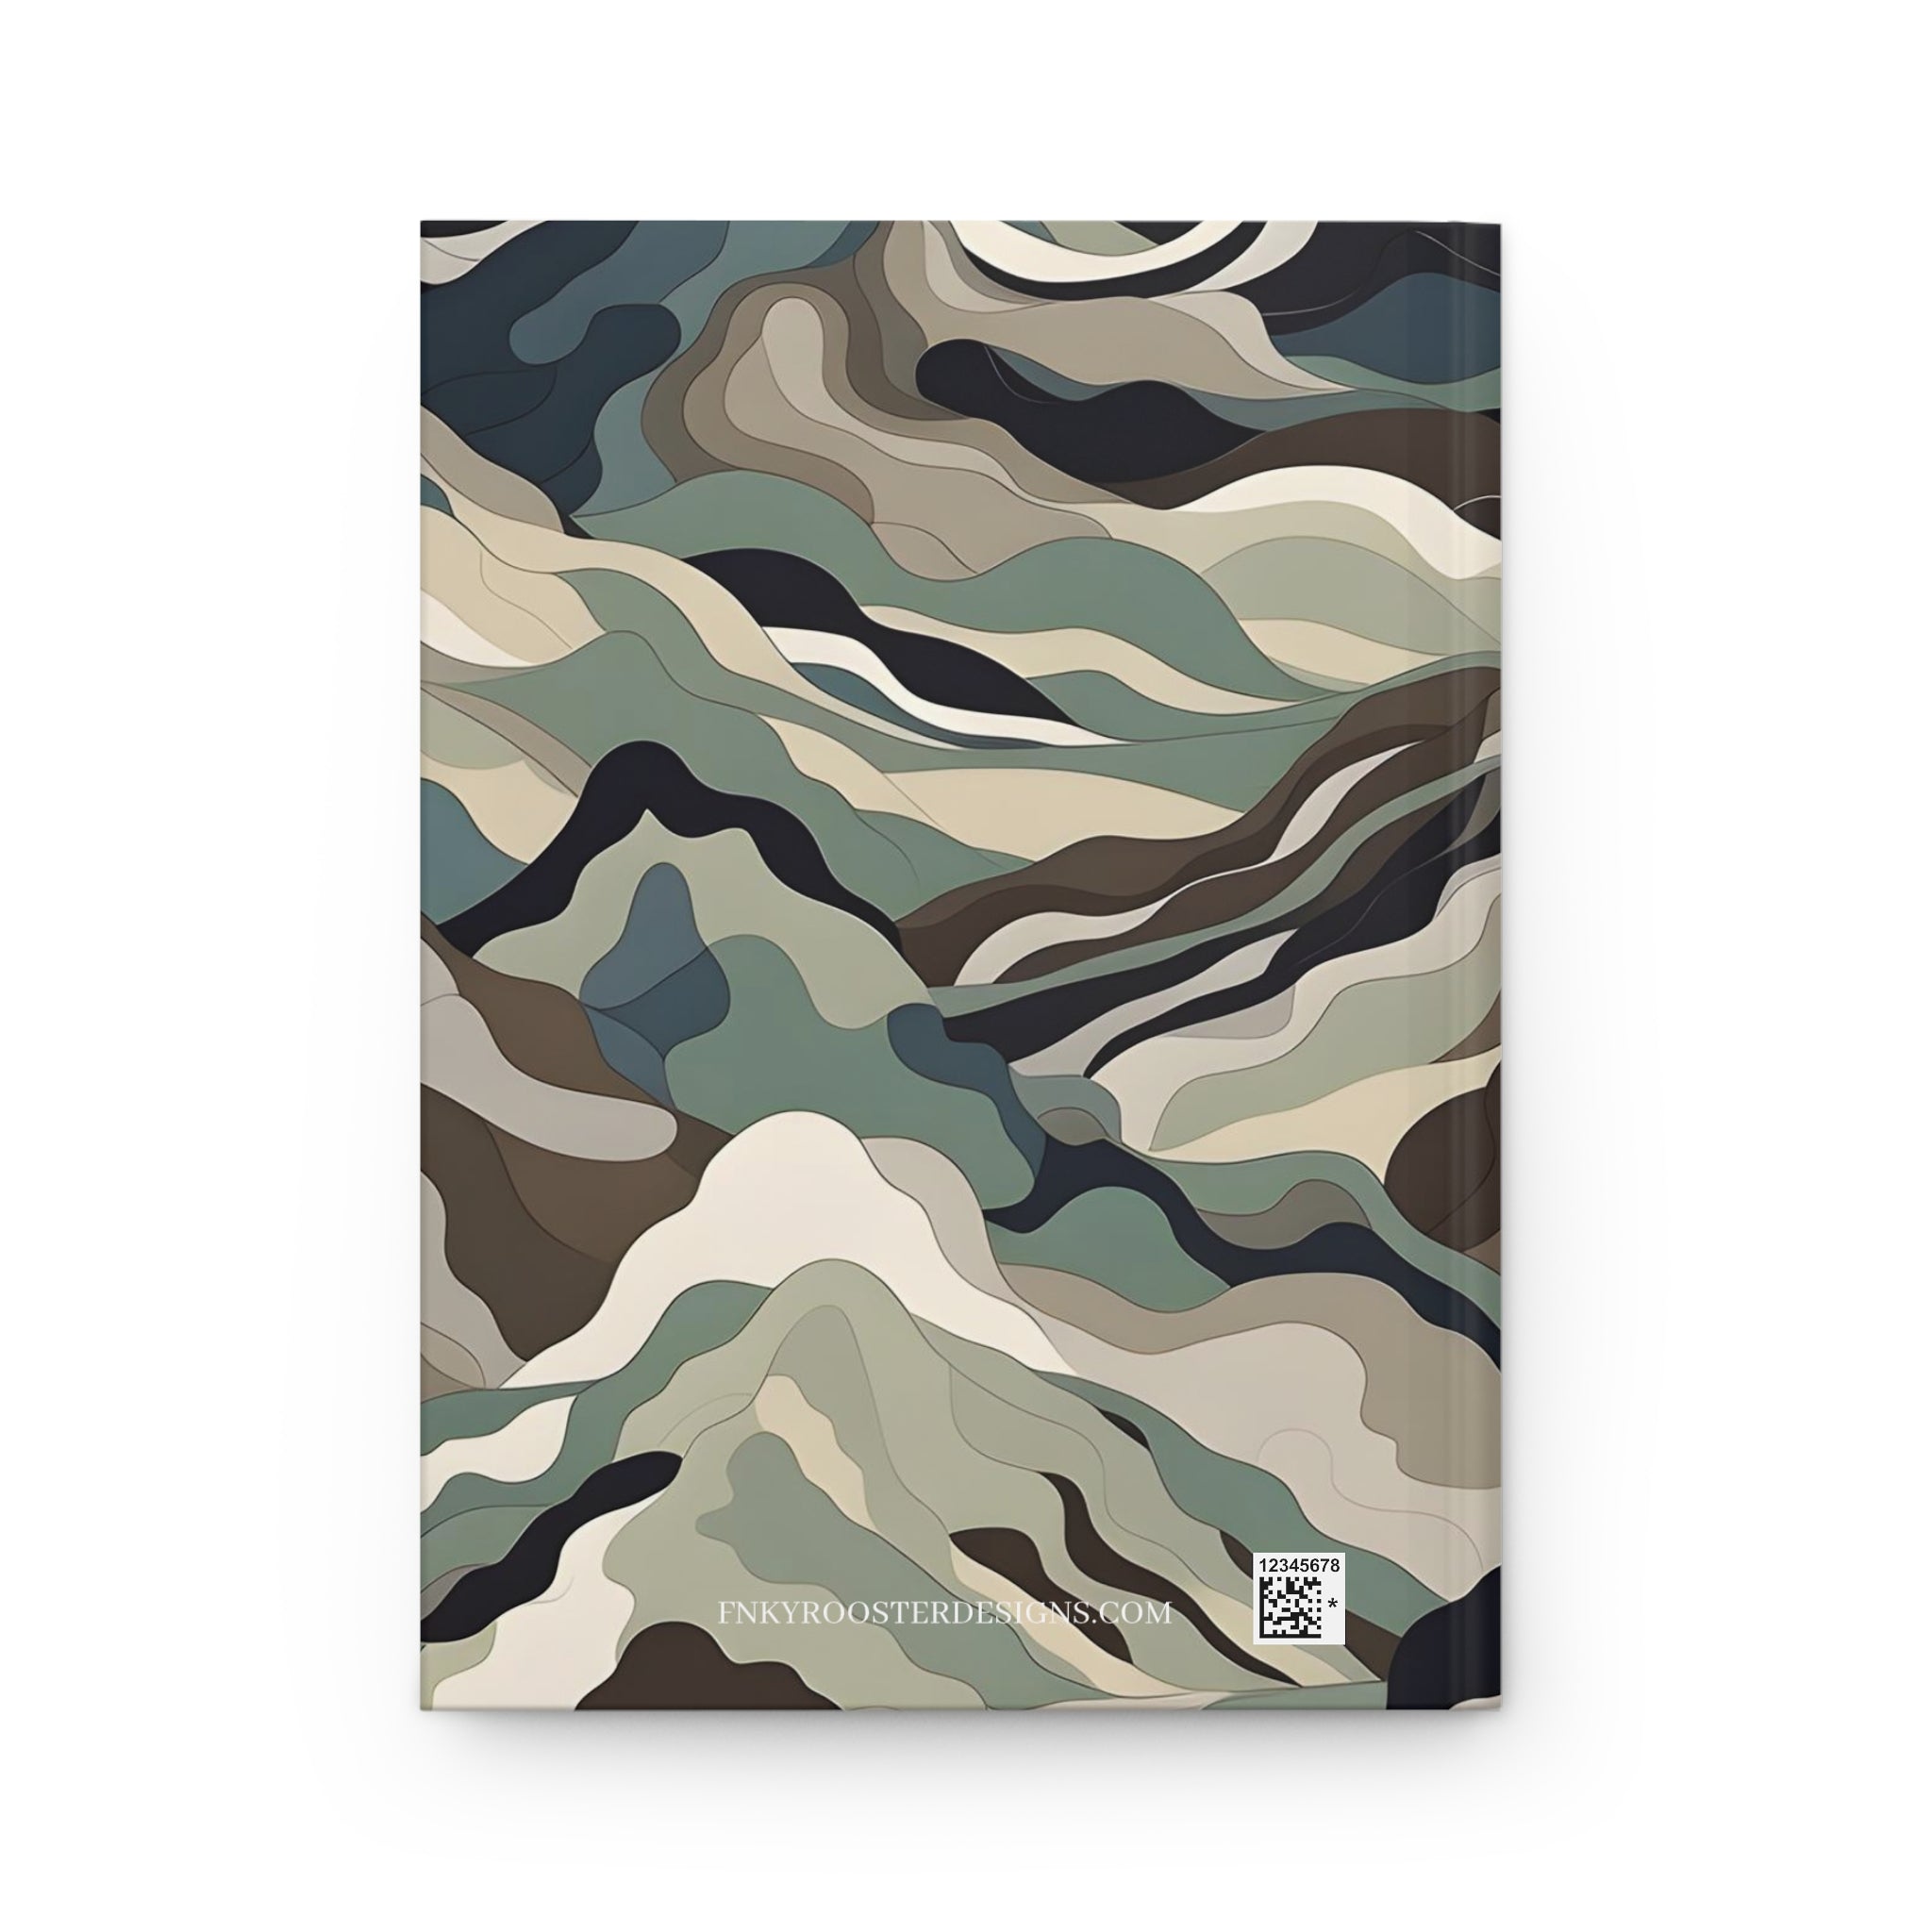 Mountain Camouflage Hardcover Journal - Ruled Pages - Outdoor Adventure Notebook - Hiking, Camping, Hunting Journal - Gift for Nature Lovers